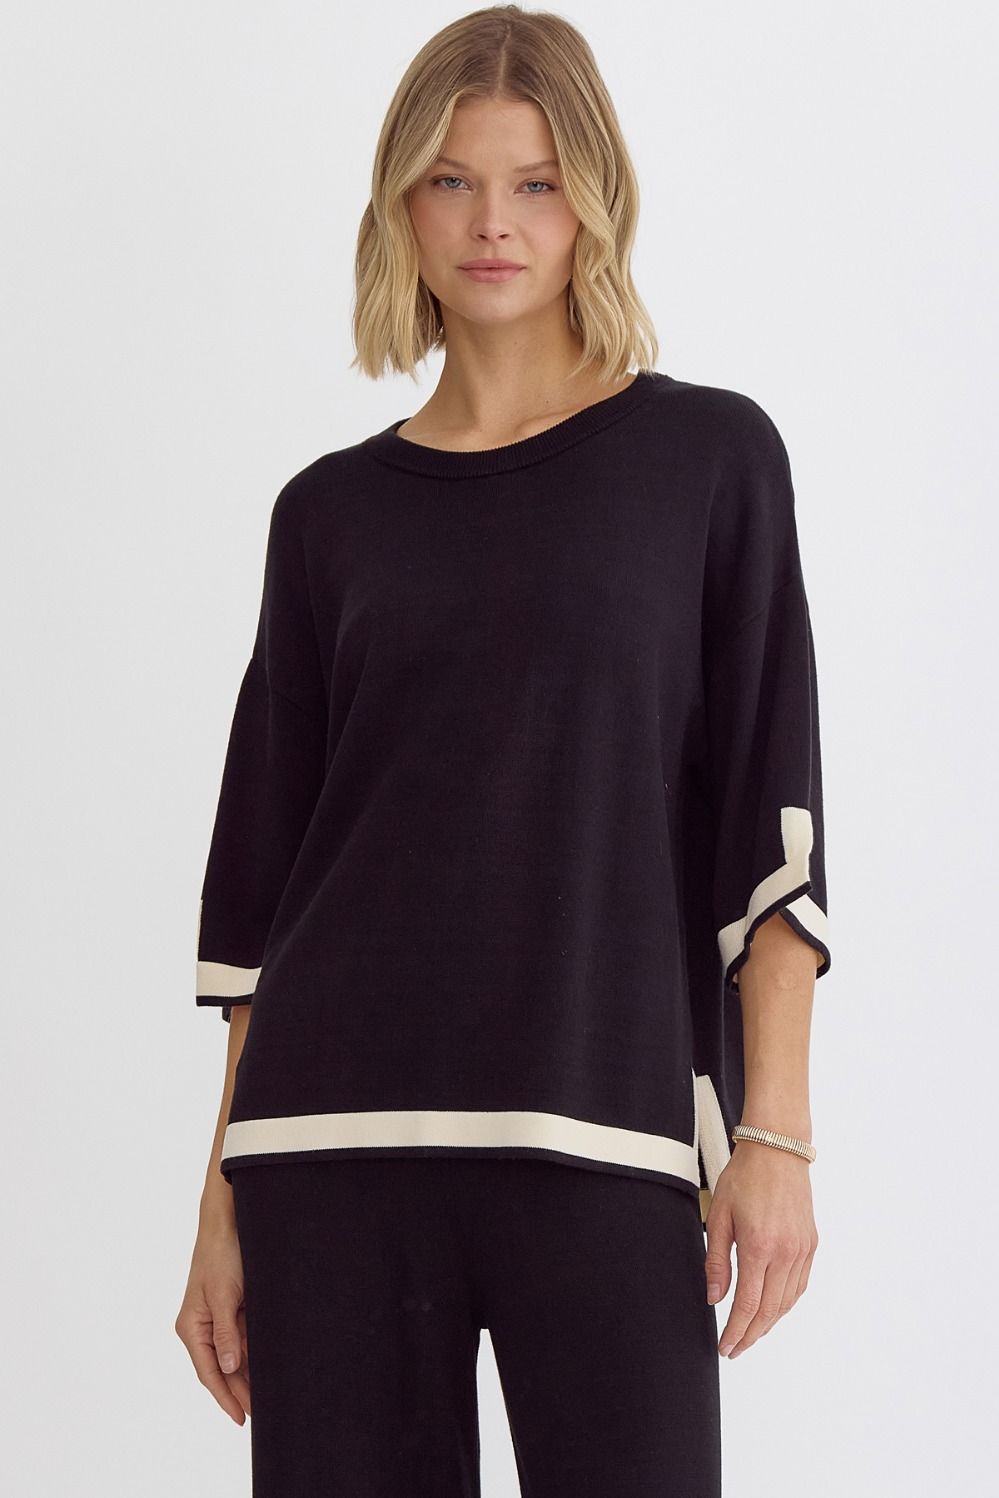 Entro | Black Knit Top | Sweetest Stitch Shop Cute Tops for Women